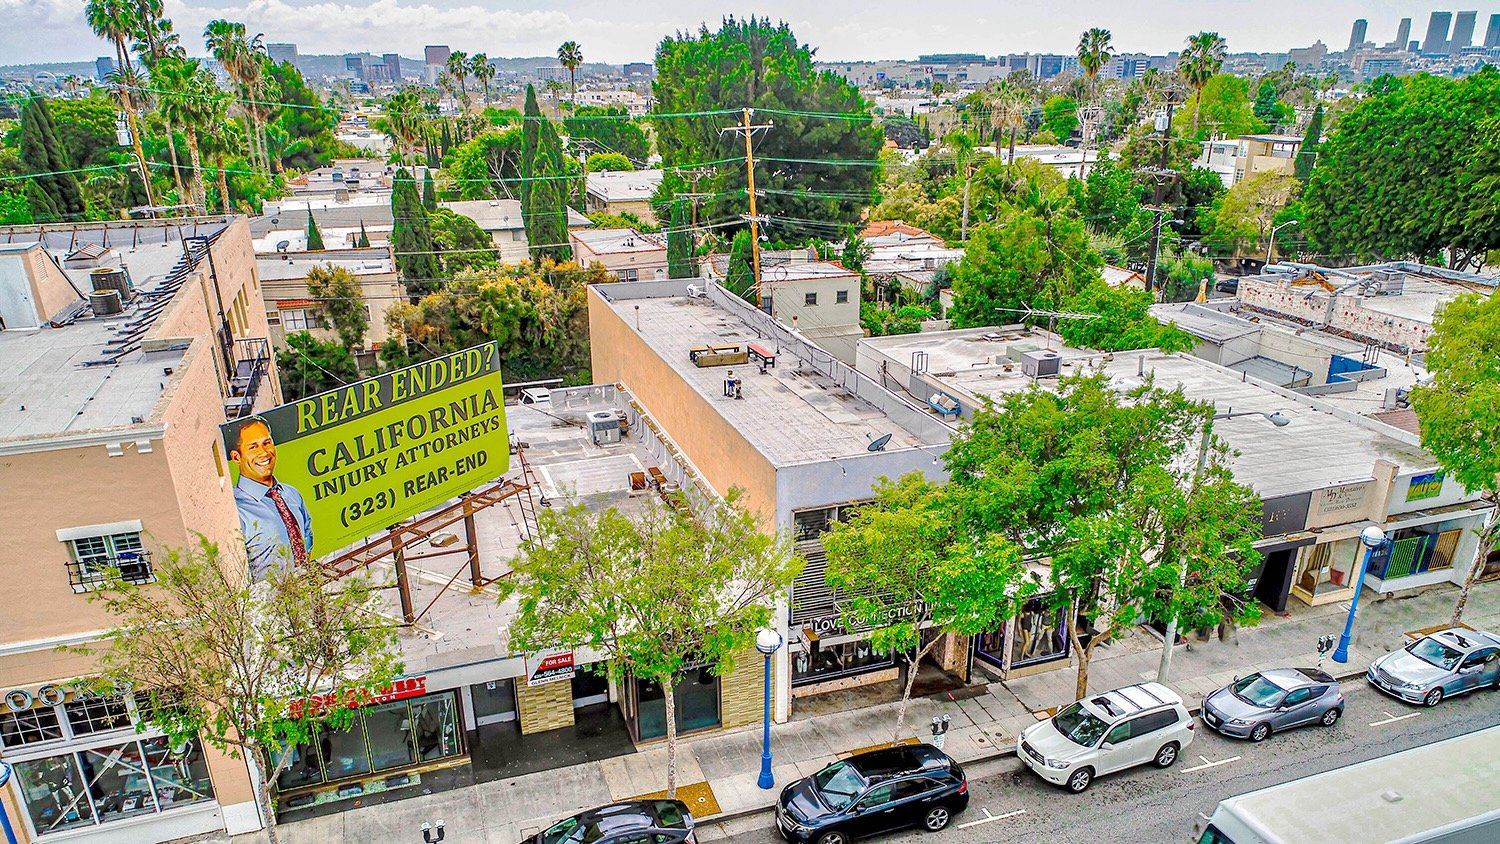 Elevated view of a commercial street with a large attorney billboard 2